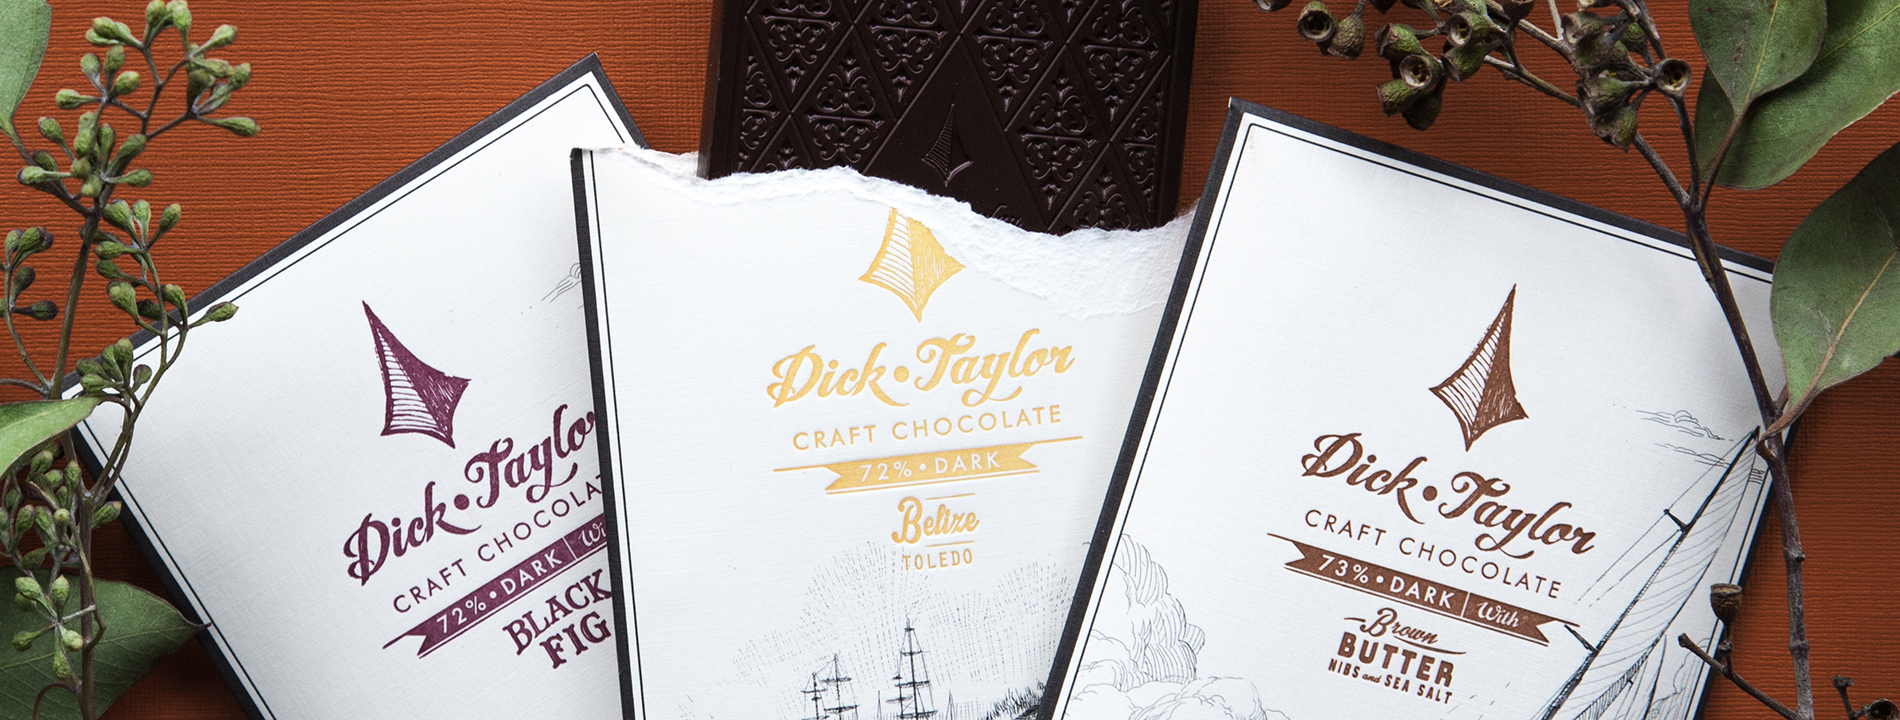 MOH_Blog_DickTaylorChocolate_Header00.png 